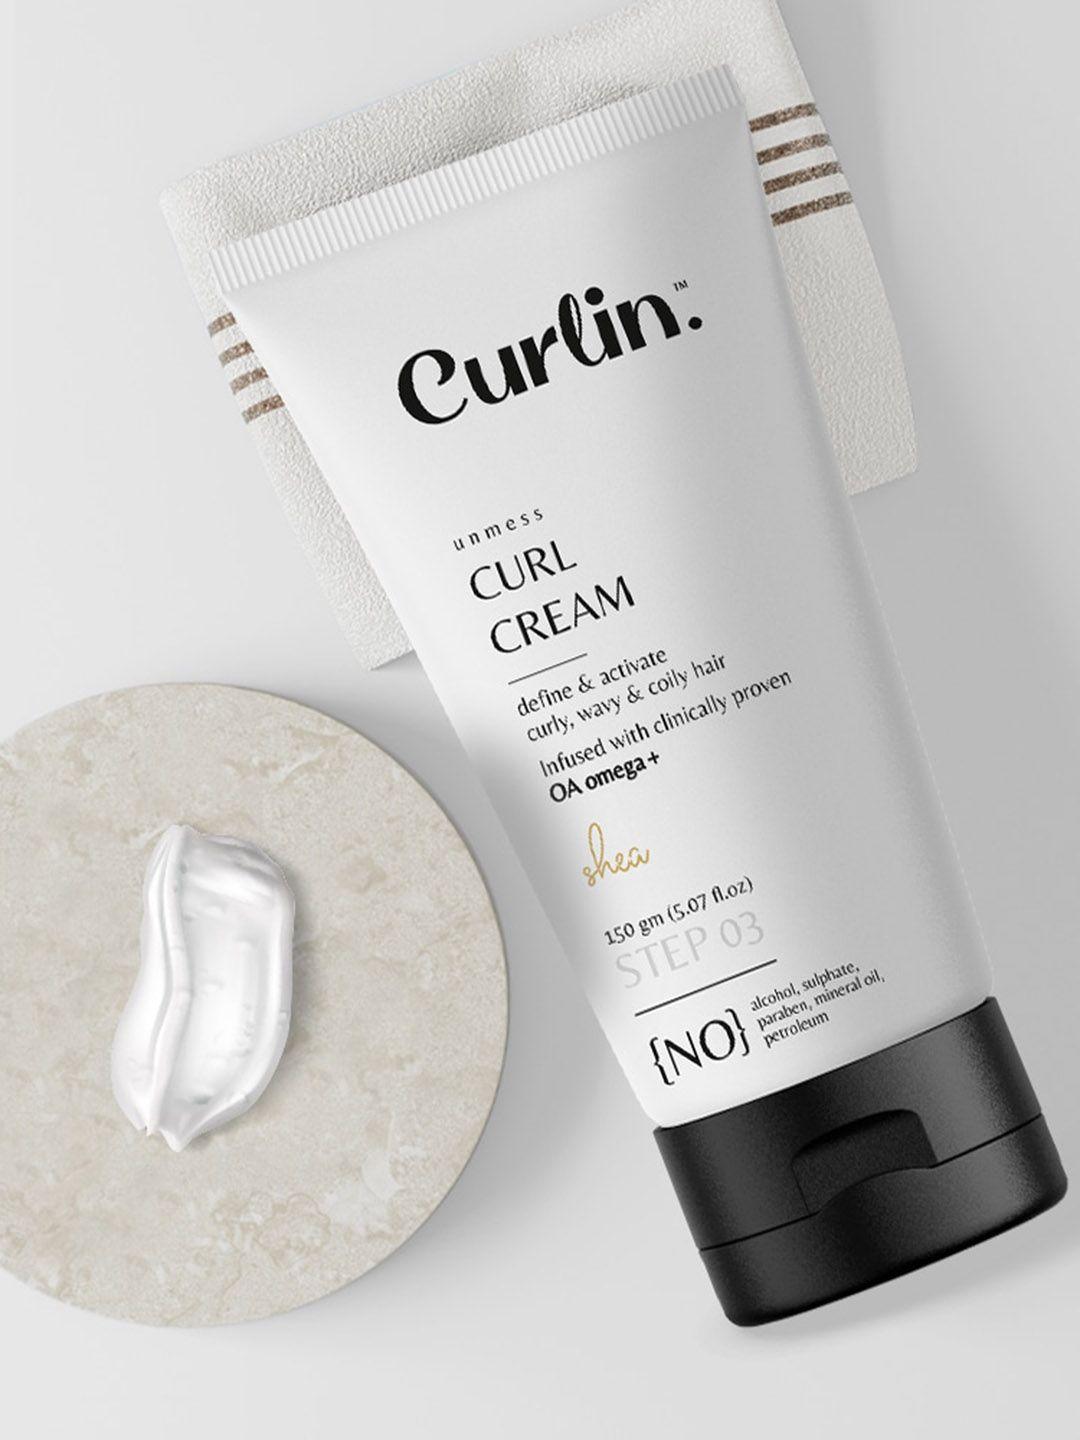 curlin unmess leave-in cream for defined curls with natural oa omega+ - 150g